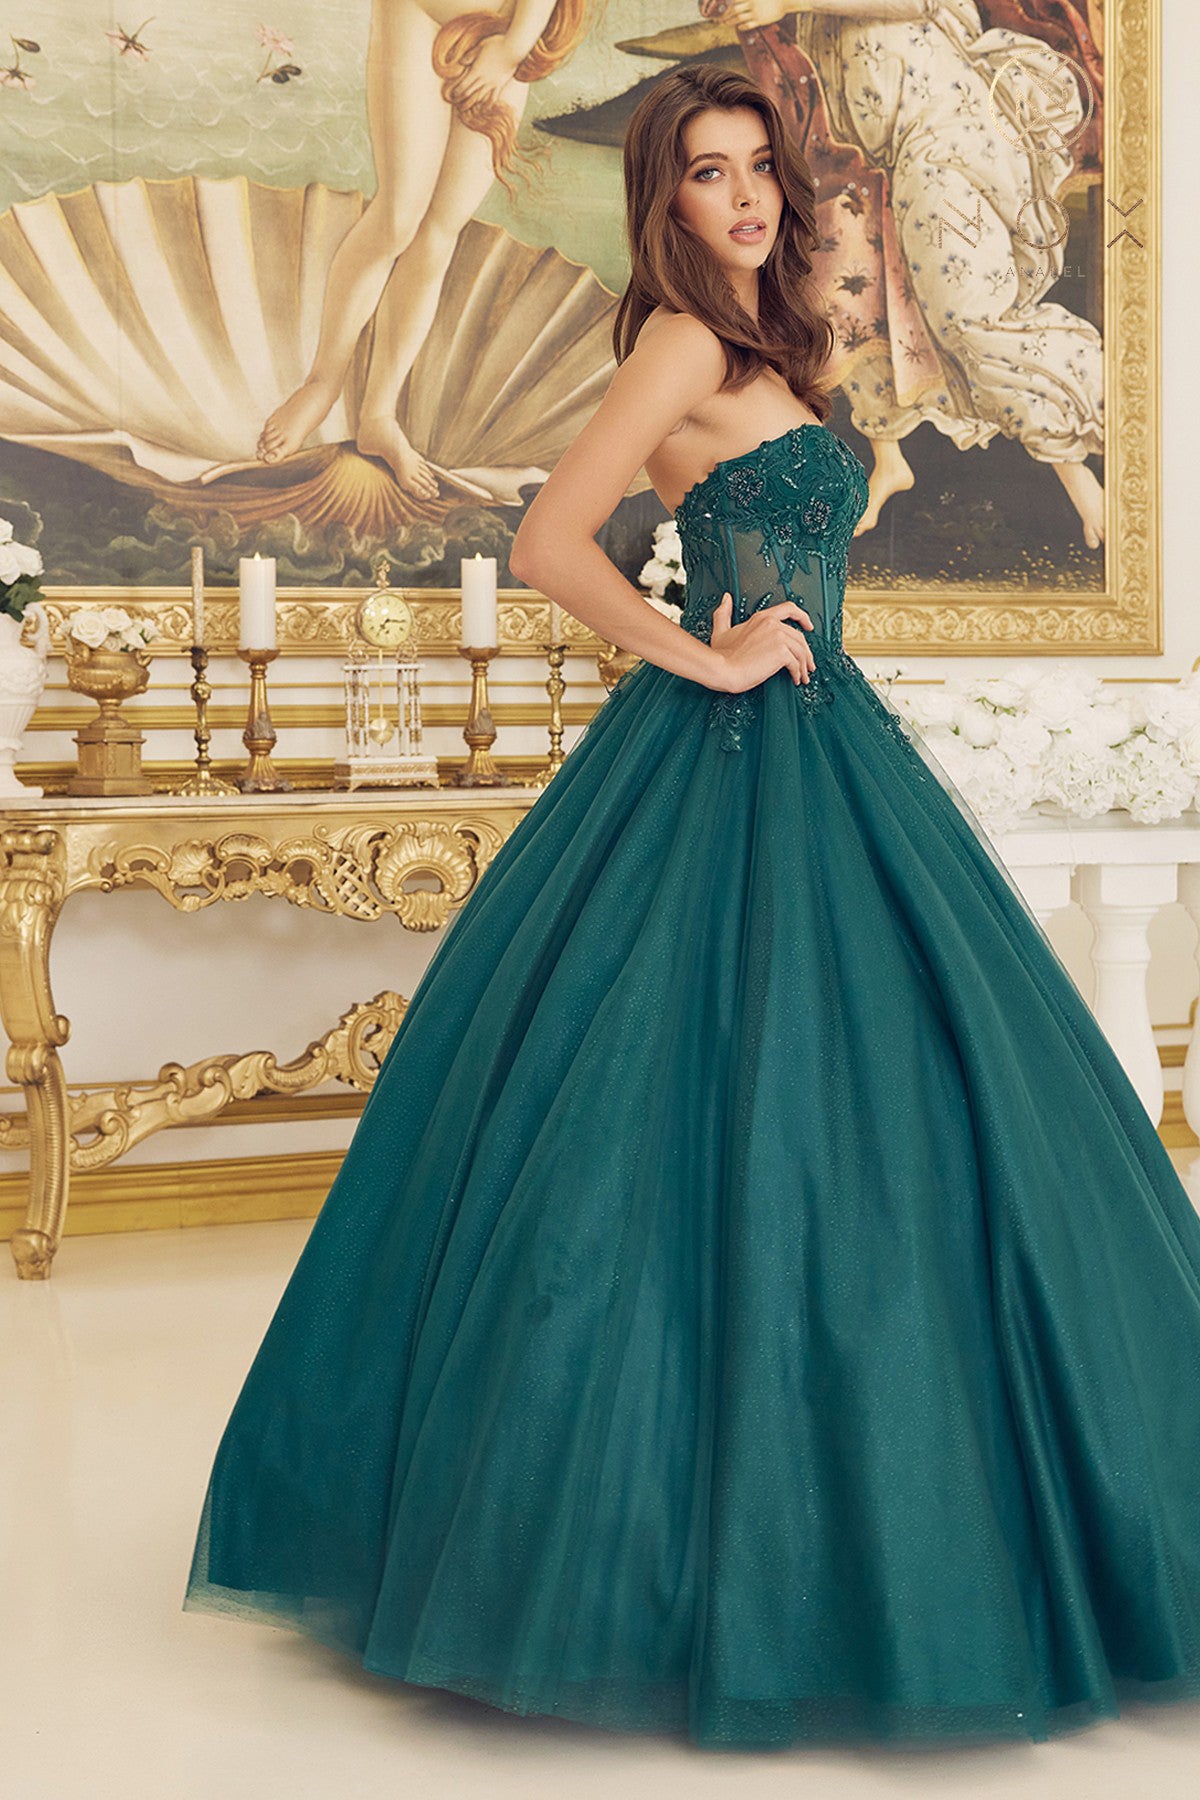 ISO a emerald green ball gown like this one! : r/weddingplanning